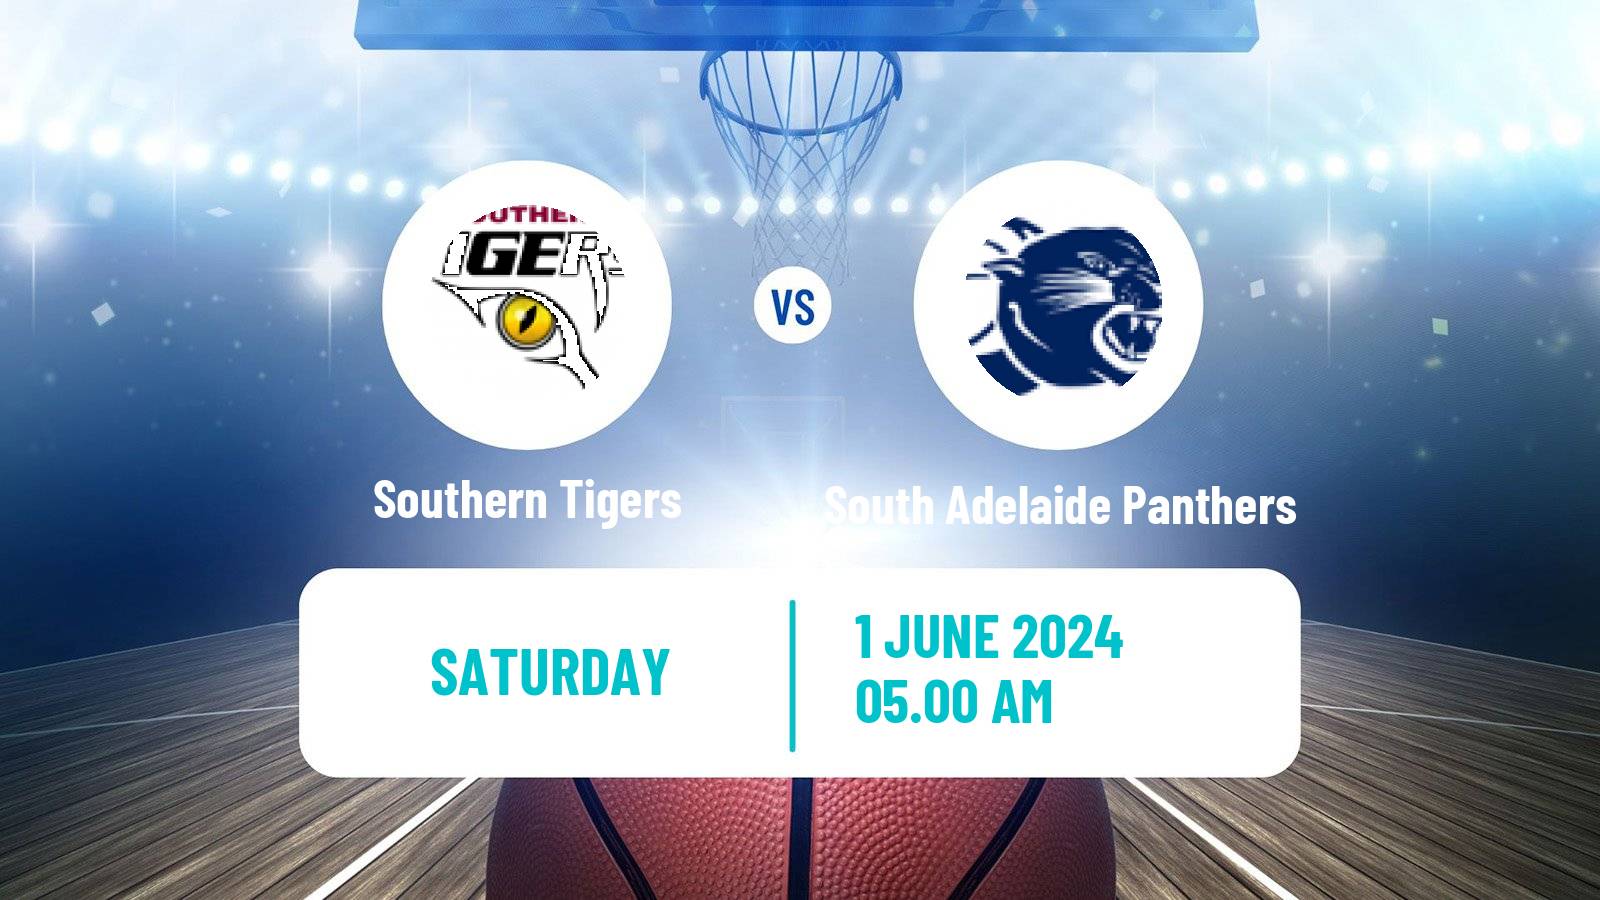 Basketball Australian NBL1 Central Women Southern Tigers - South Adelaide Panthers